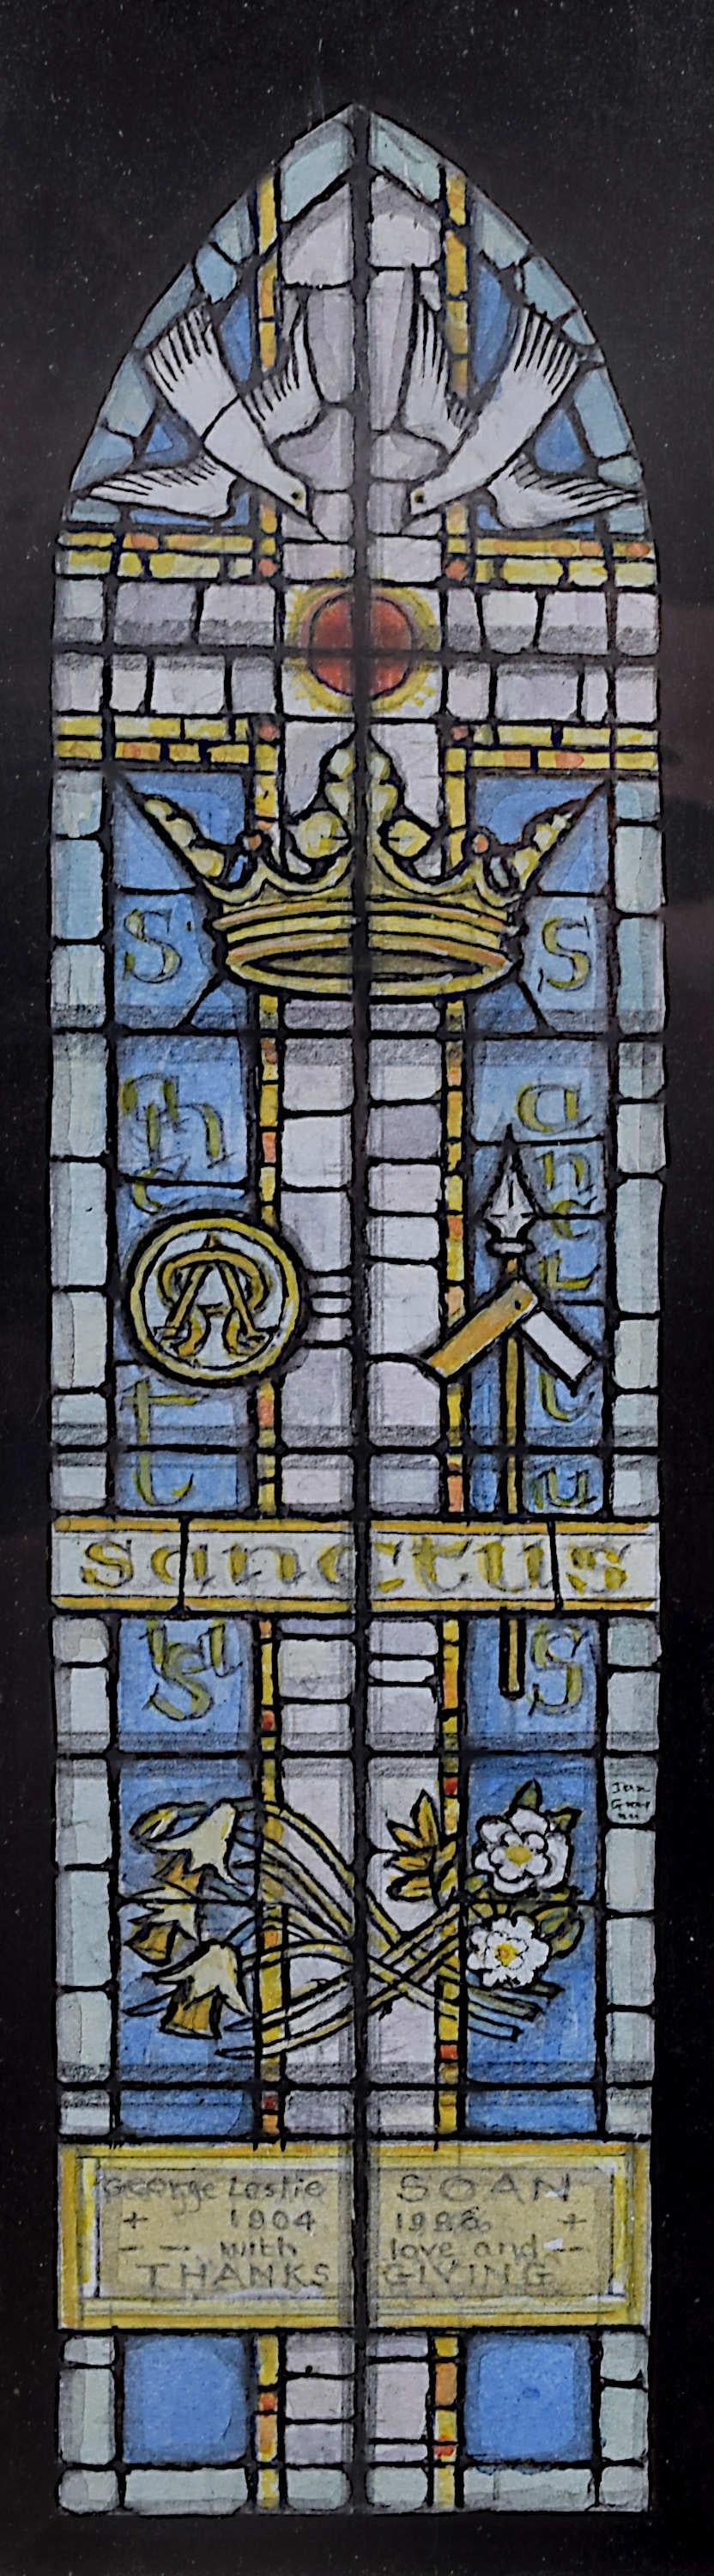 We acquired a series of watercolour stained glass designs from Jane Gray's studio. To find more scroll down to "More from this Seller" and below it click on "See all from this seller." 

Jane Gray (b.1931)
Stained Glass Design
Watercolour
18 x 5